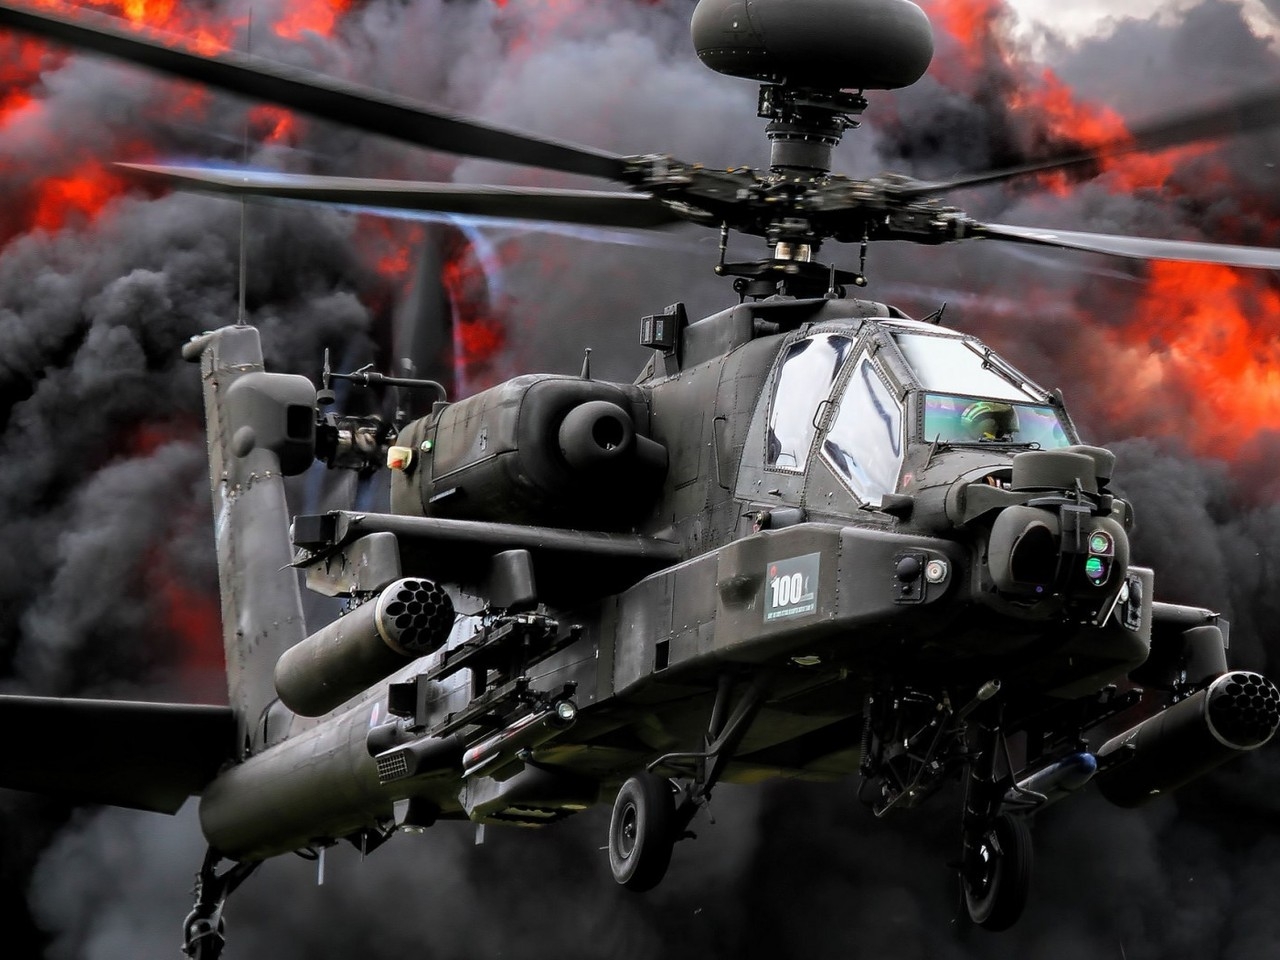 Boeing AH 64 Apache for 1280 x 960 resolution